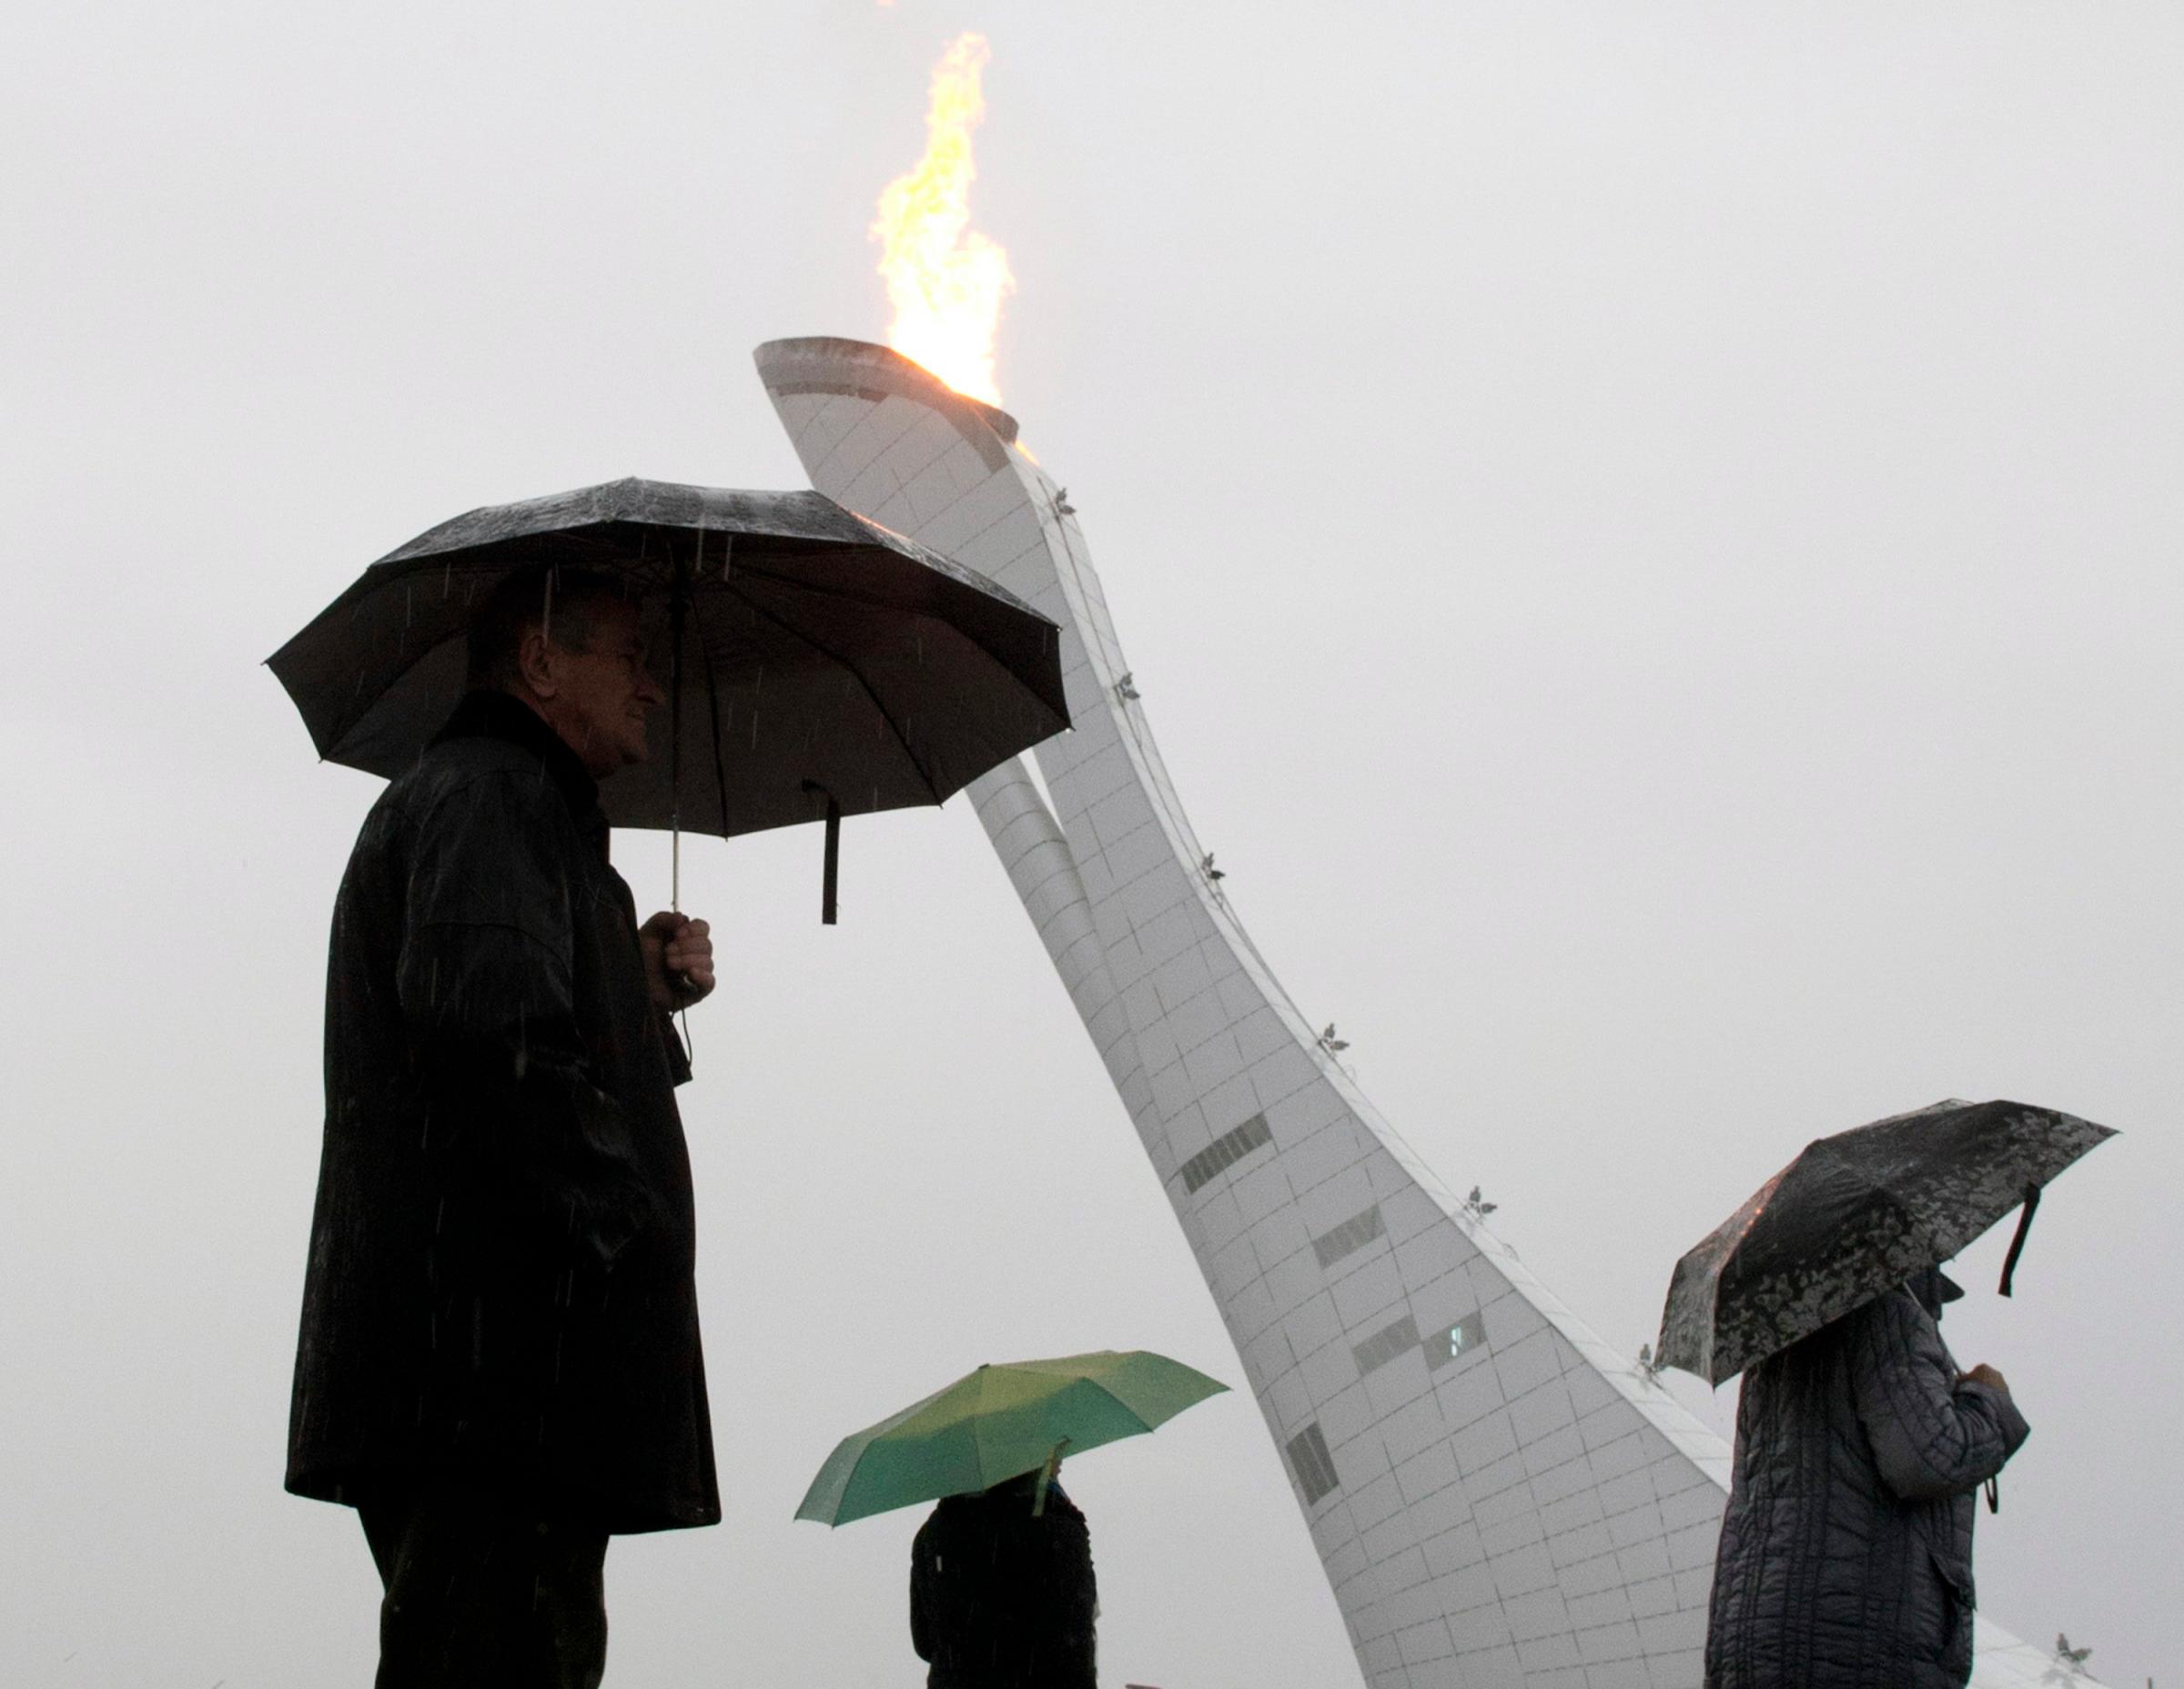 Visitors to the Olympic park walk past the Olympic cauldron as it rains at the Sochi Winter Olympics.